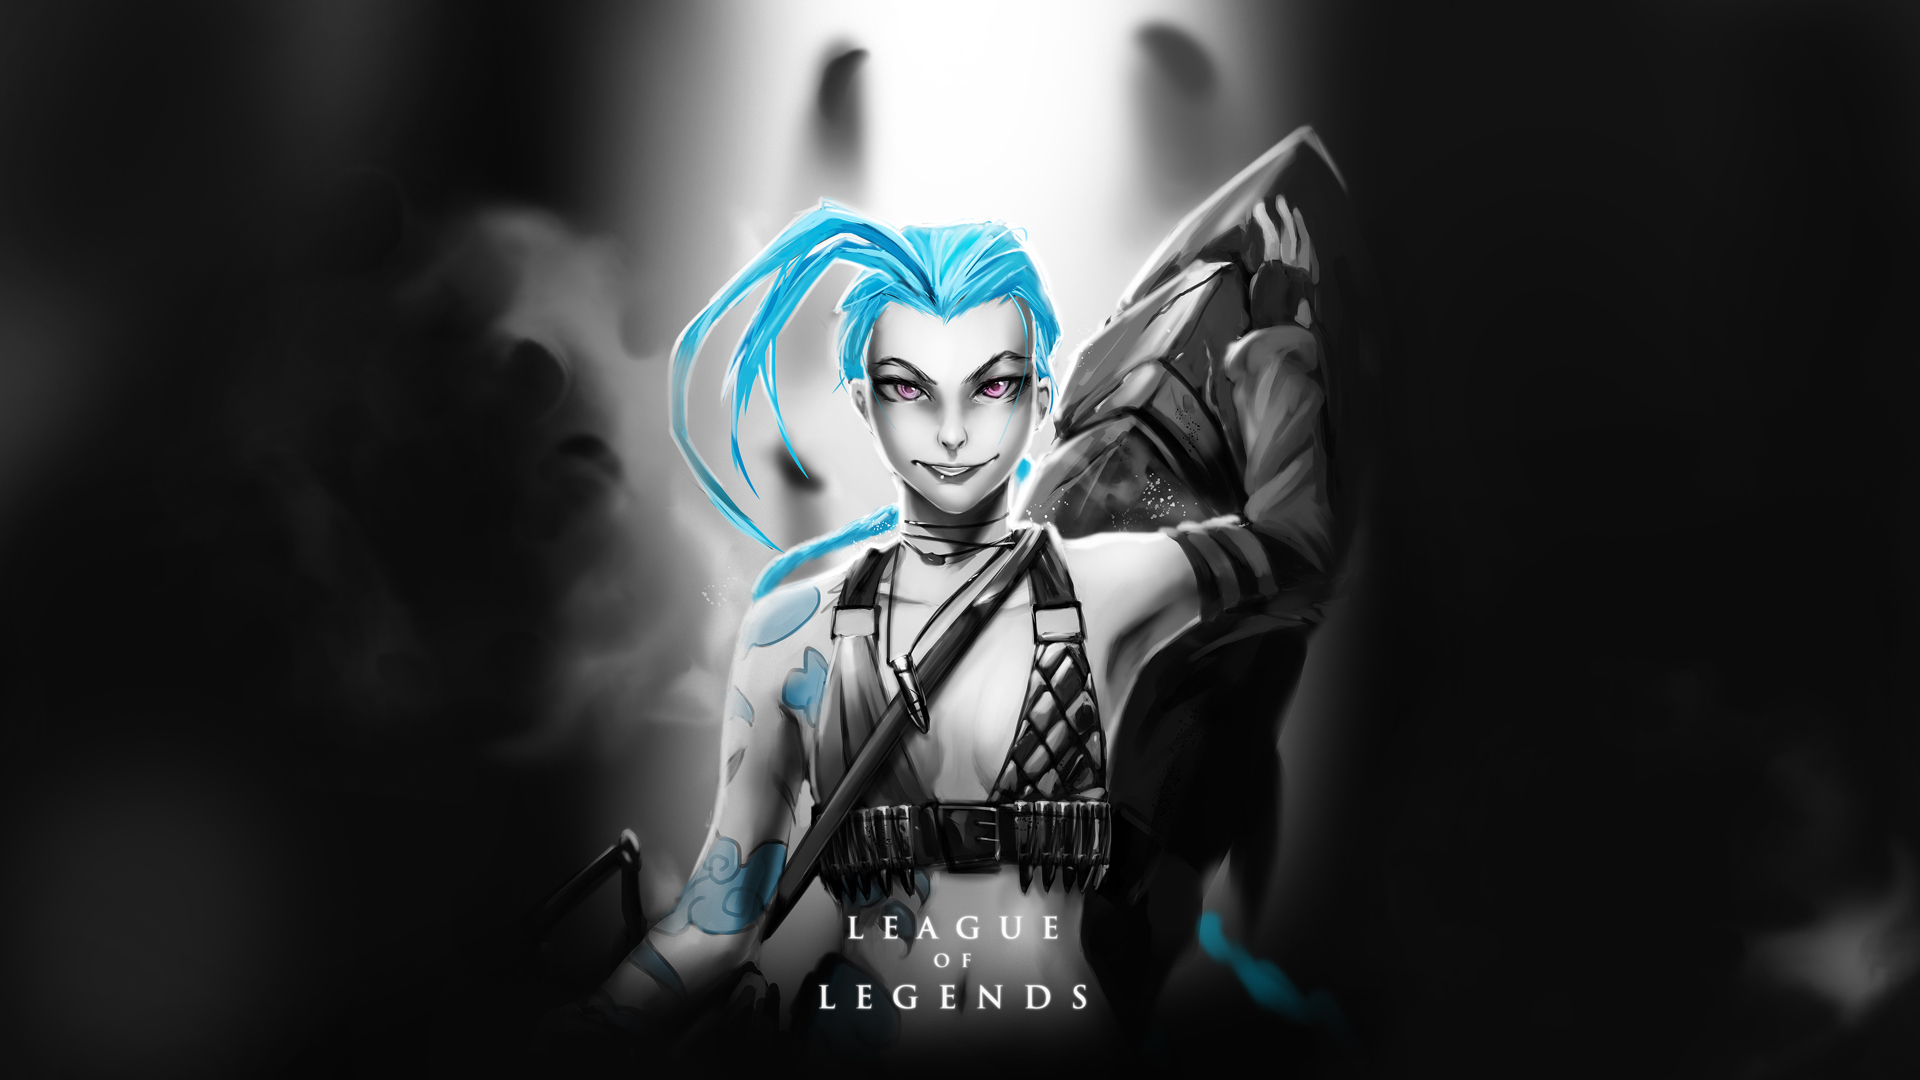 Jinx Lolwallpapers Images, Photos, Reviews